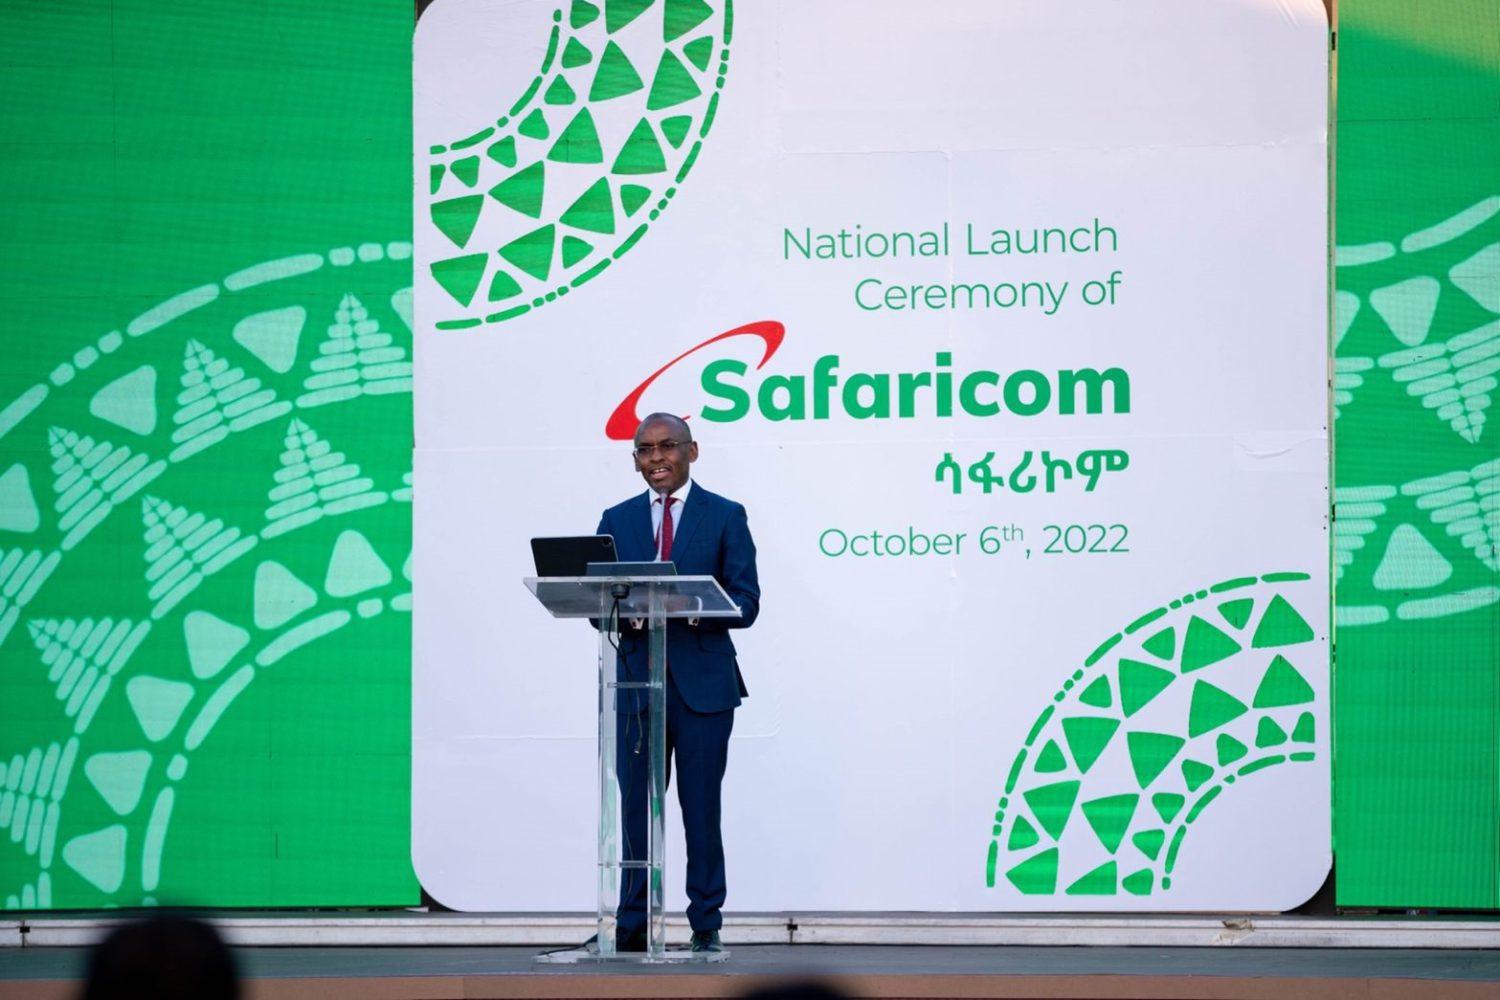 Safaricom outlines its achievements and future plans for Ethiopia